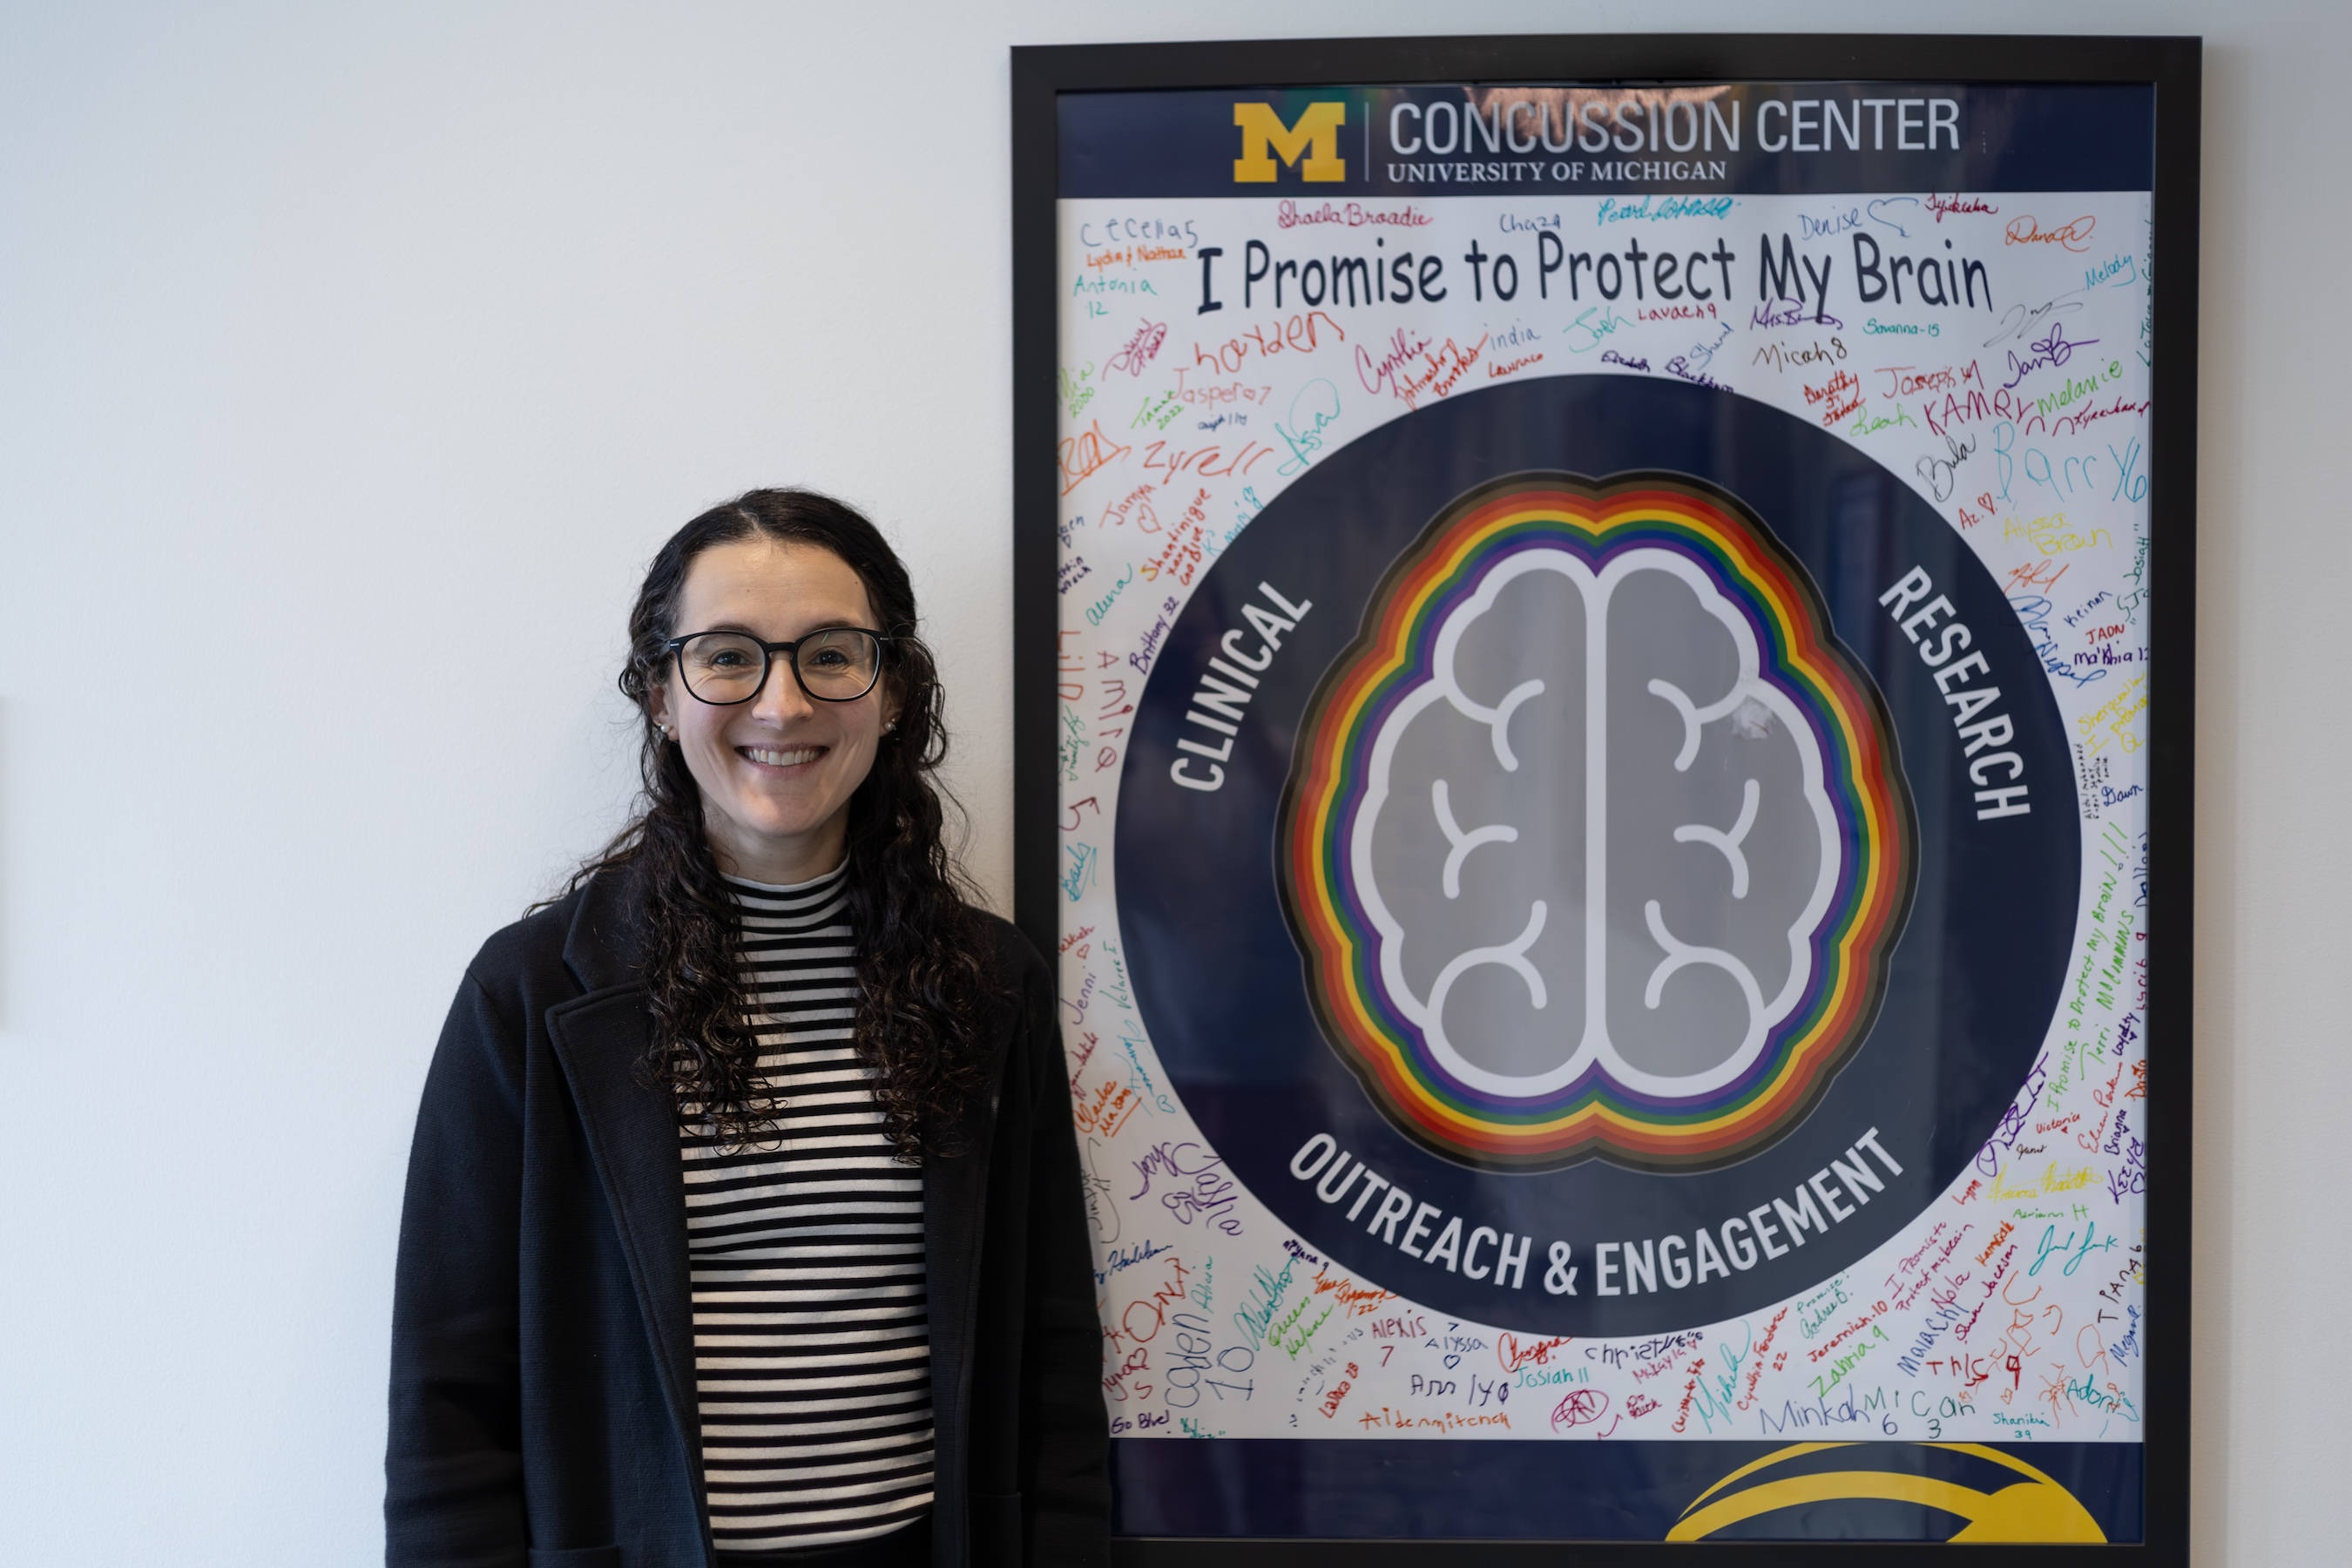 Eleanna Varangis with a Concussion Center sign